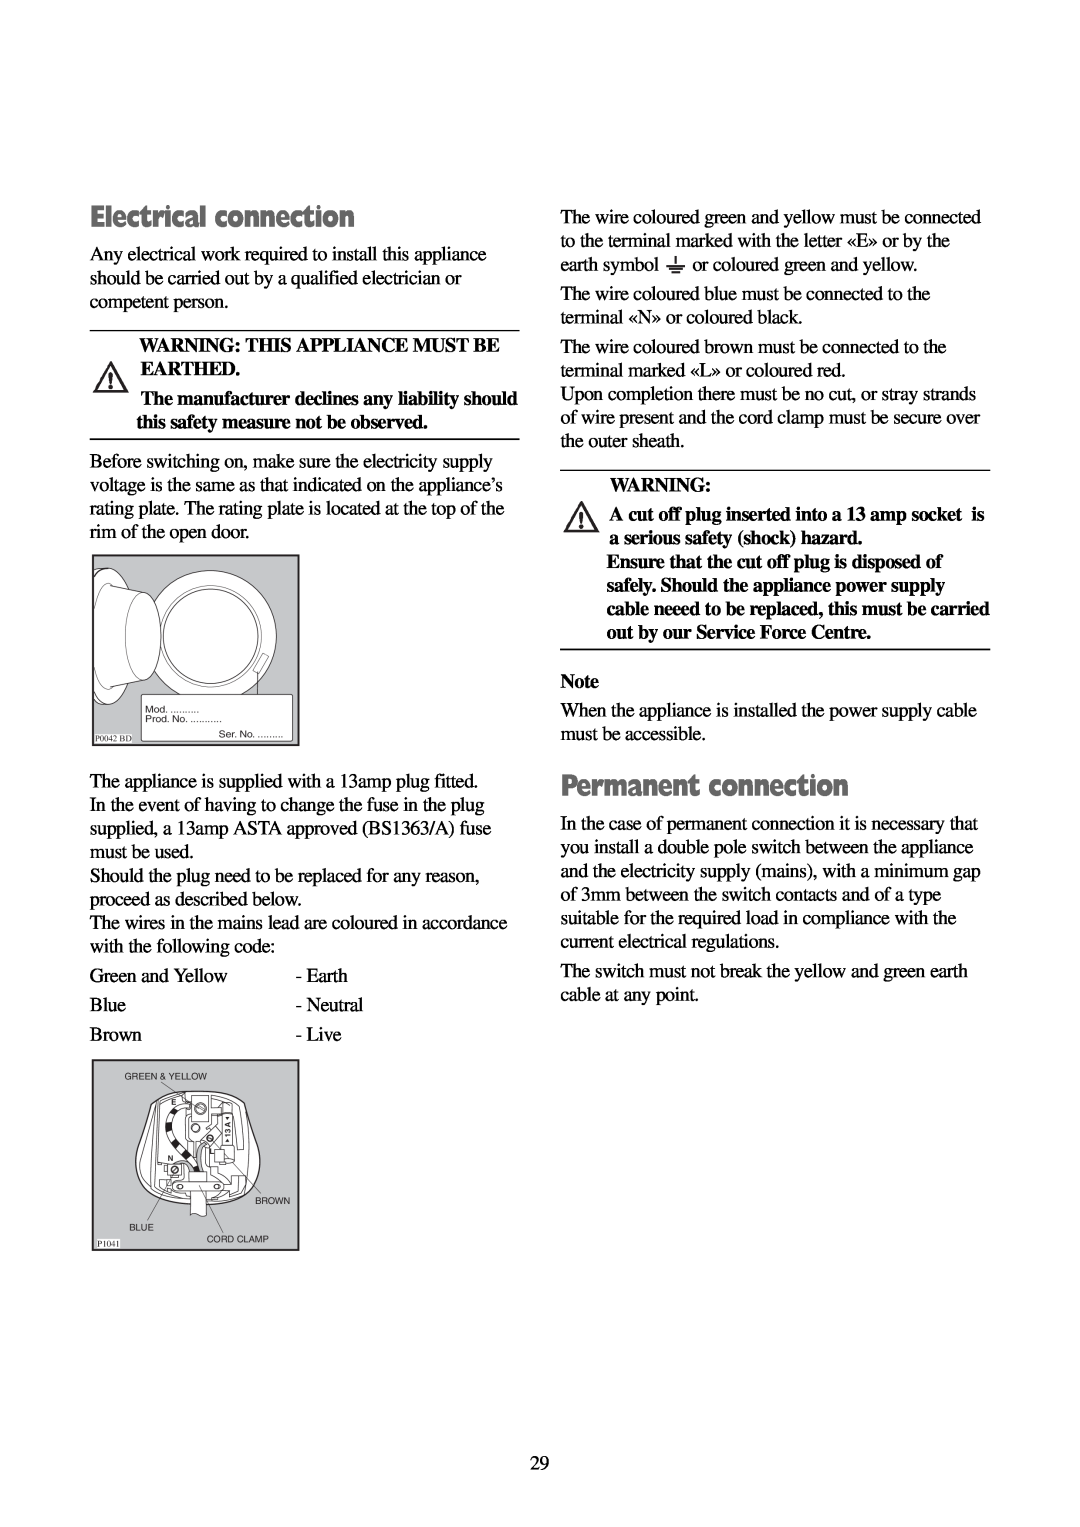 Electrolux EWD 1419 I manual Electrical connection, Permanent connection, Warning This Appliance Must Be Earthed 